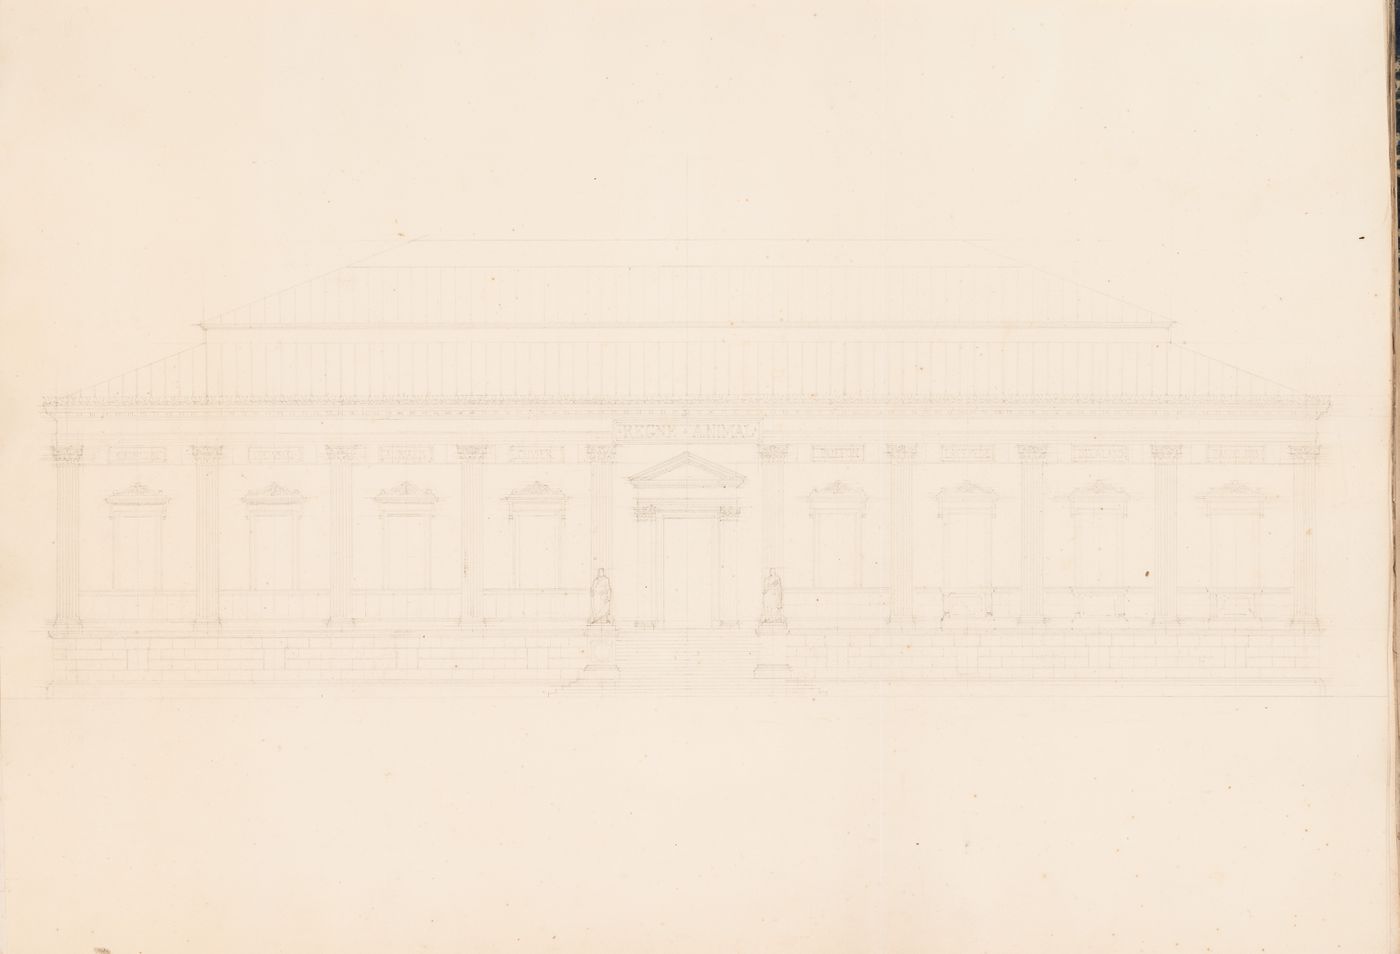 Project for a Galerie de zoologie, possibly 1838: Elevation